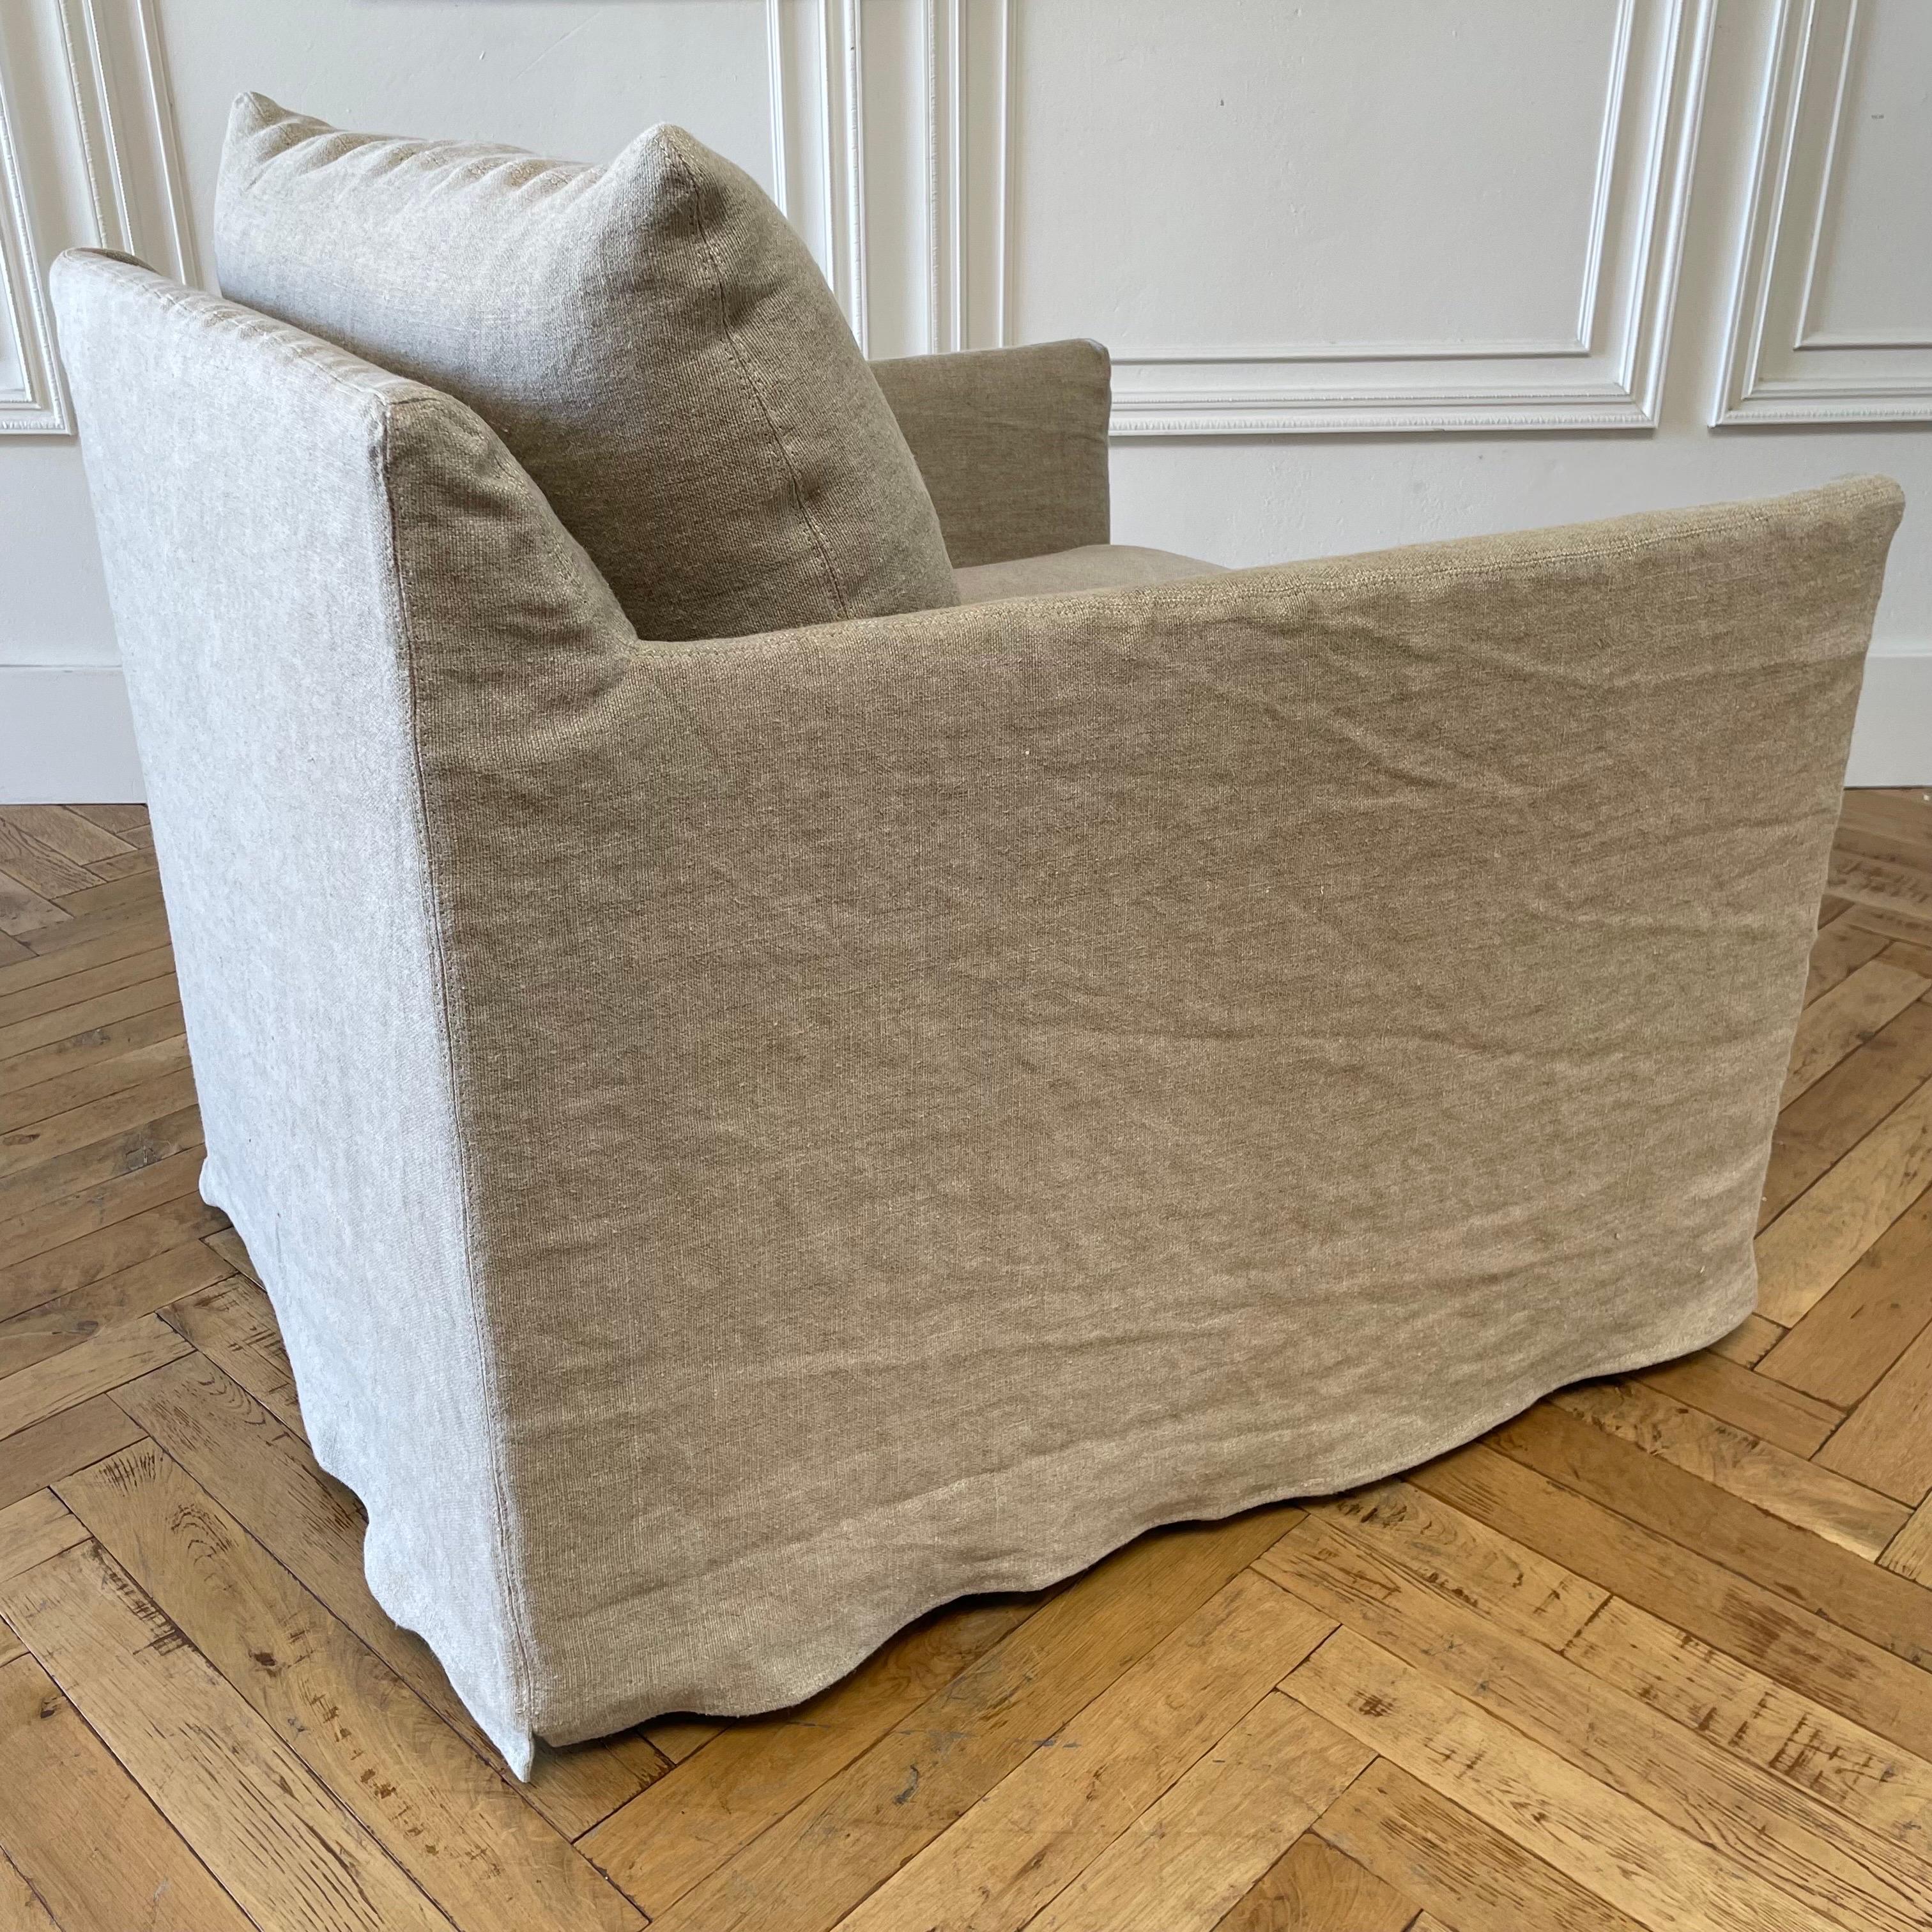 Custom Swivel Chair Slip Covered in a Heavy Flax Stone Washed Linen For Sale 6